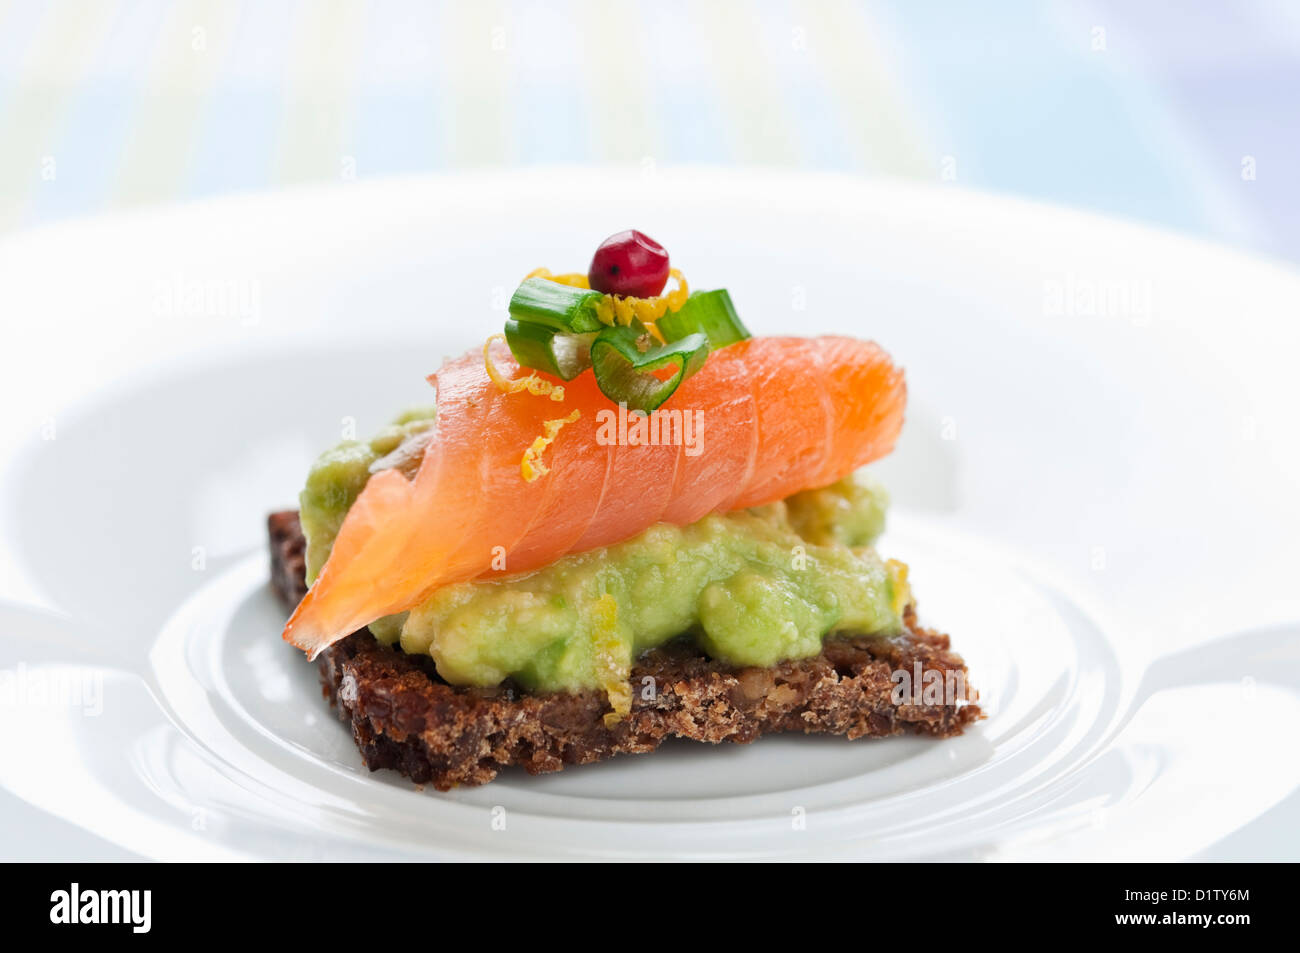 Brown bread sandwich with smoked salmon, avocado topped with chive and pepper Stock Photo